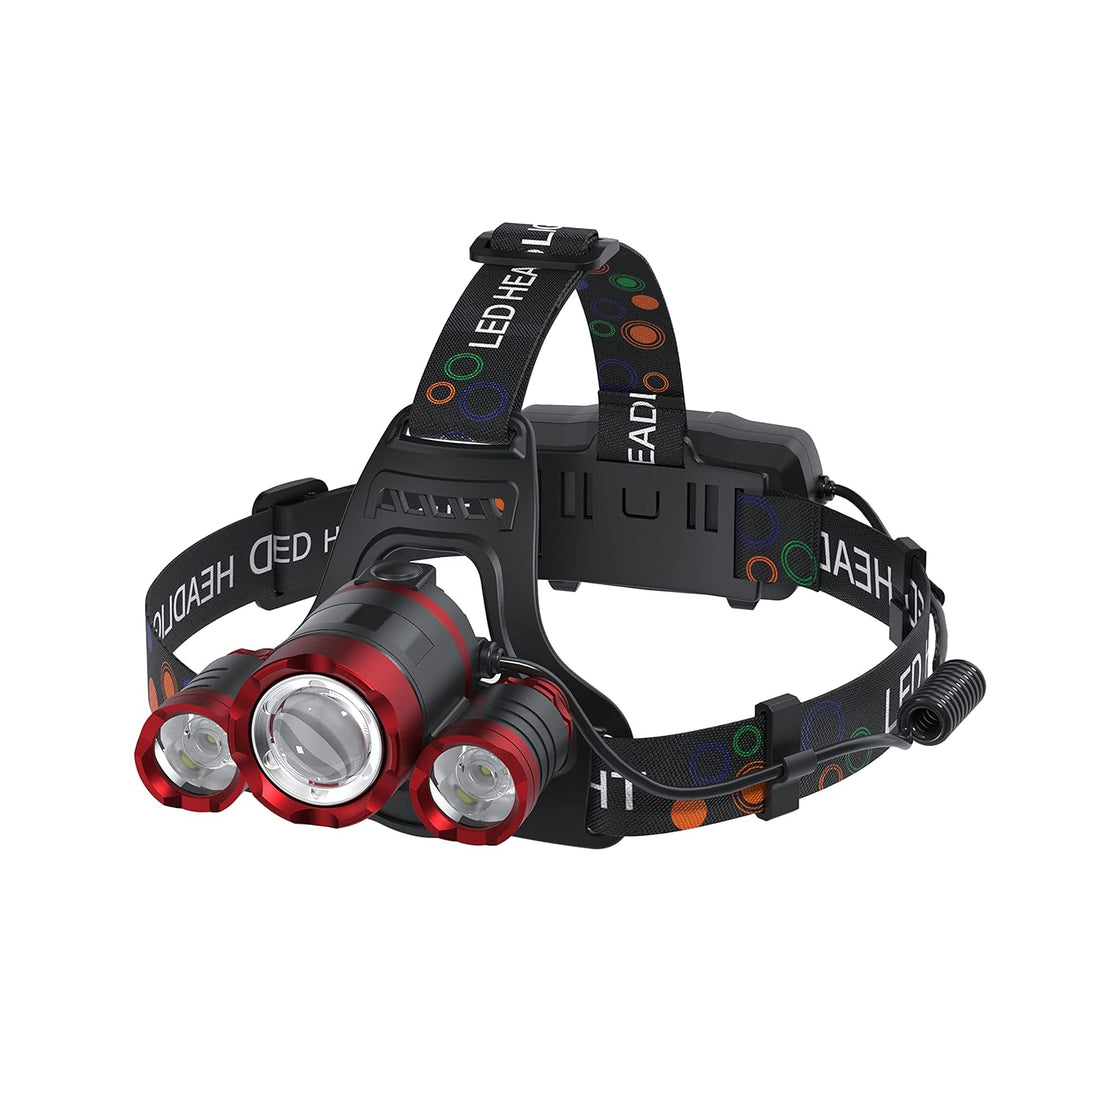 Headlamp Rechargeable Headlamps 6000 High Lumens Super Brightest Head Lamp for Adluts Kids Waterproof Headlight 4 Modes Lightweight Head Lights for Outdoor Camping Hunting Running Hiking Reading(Red)